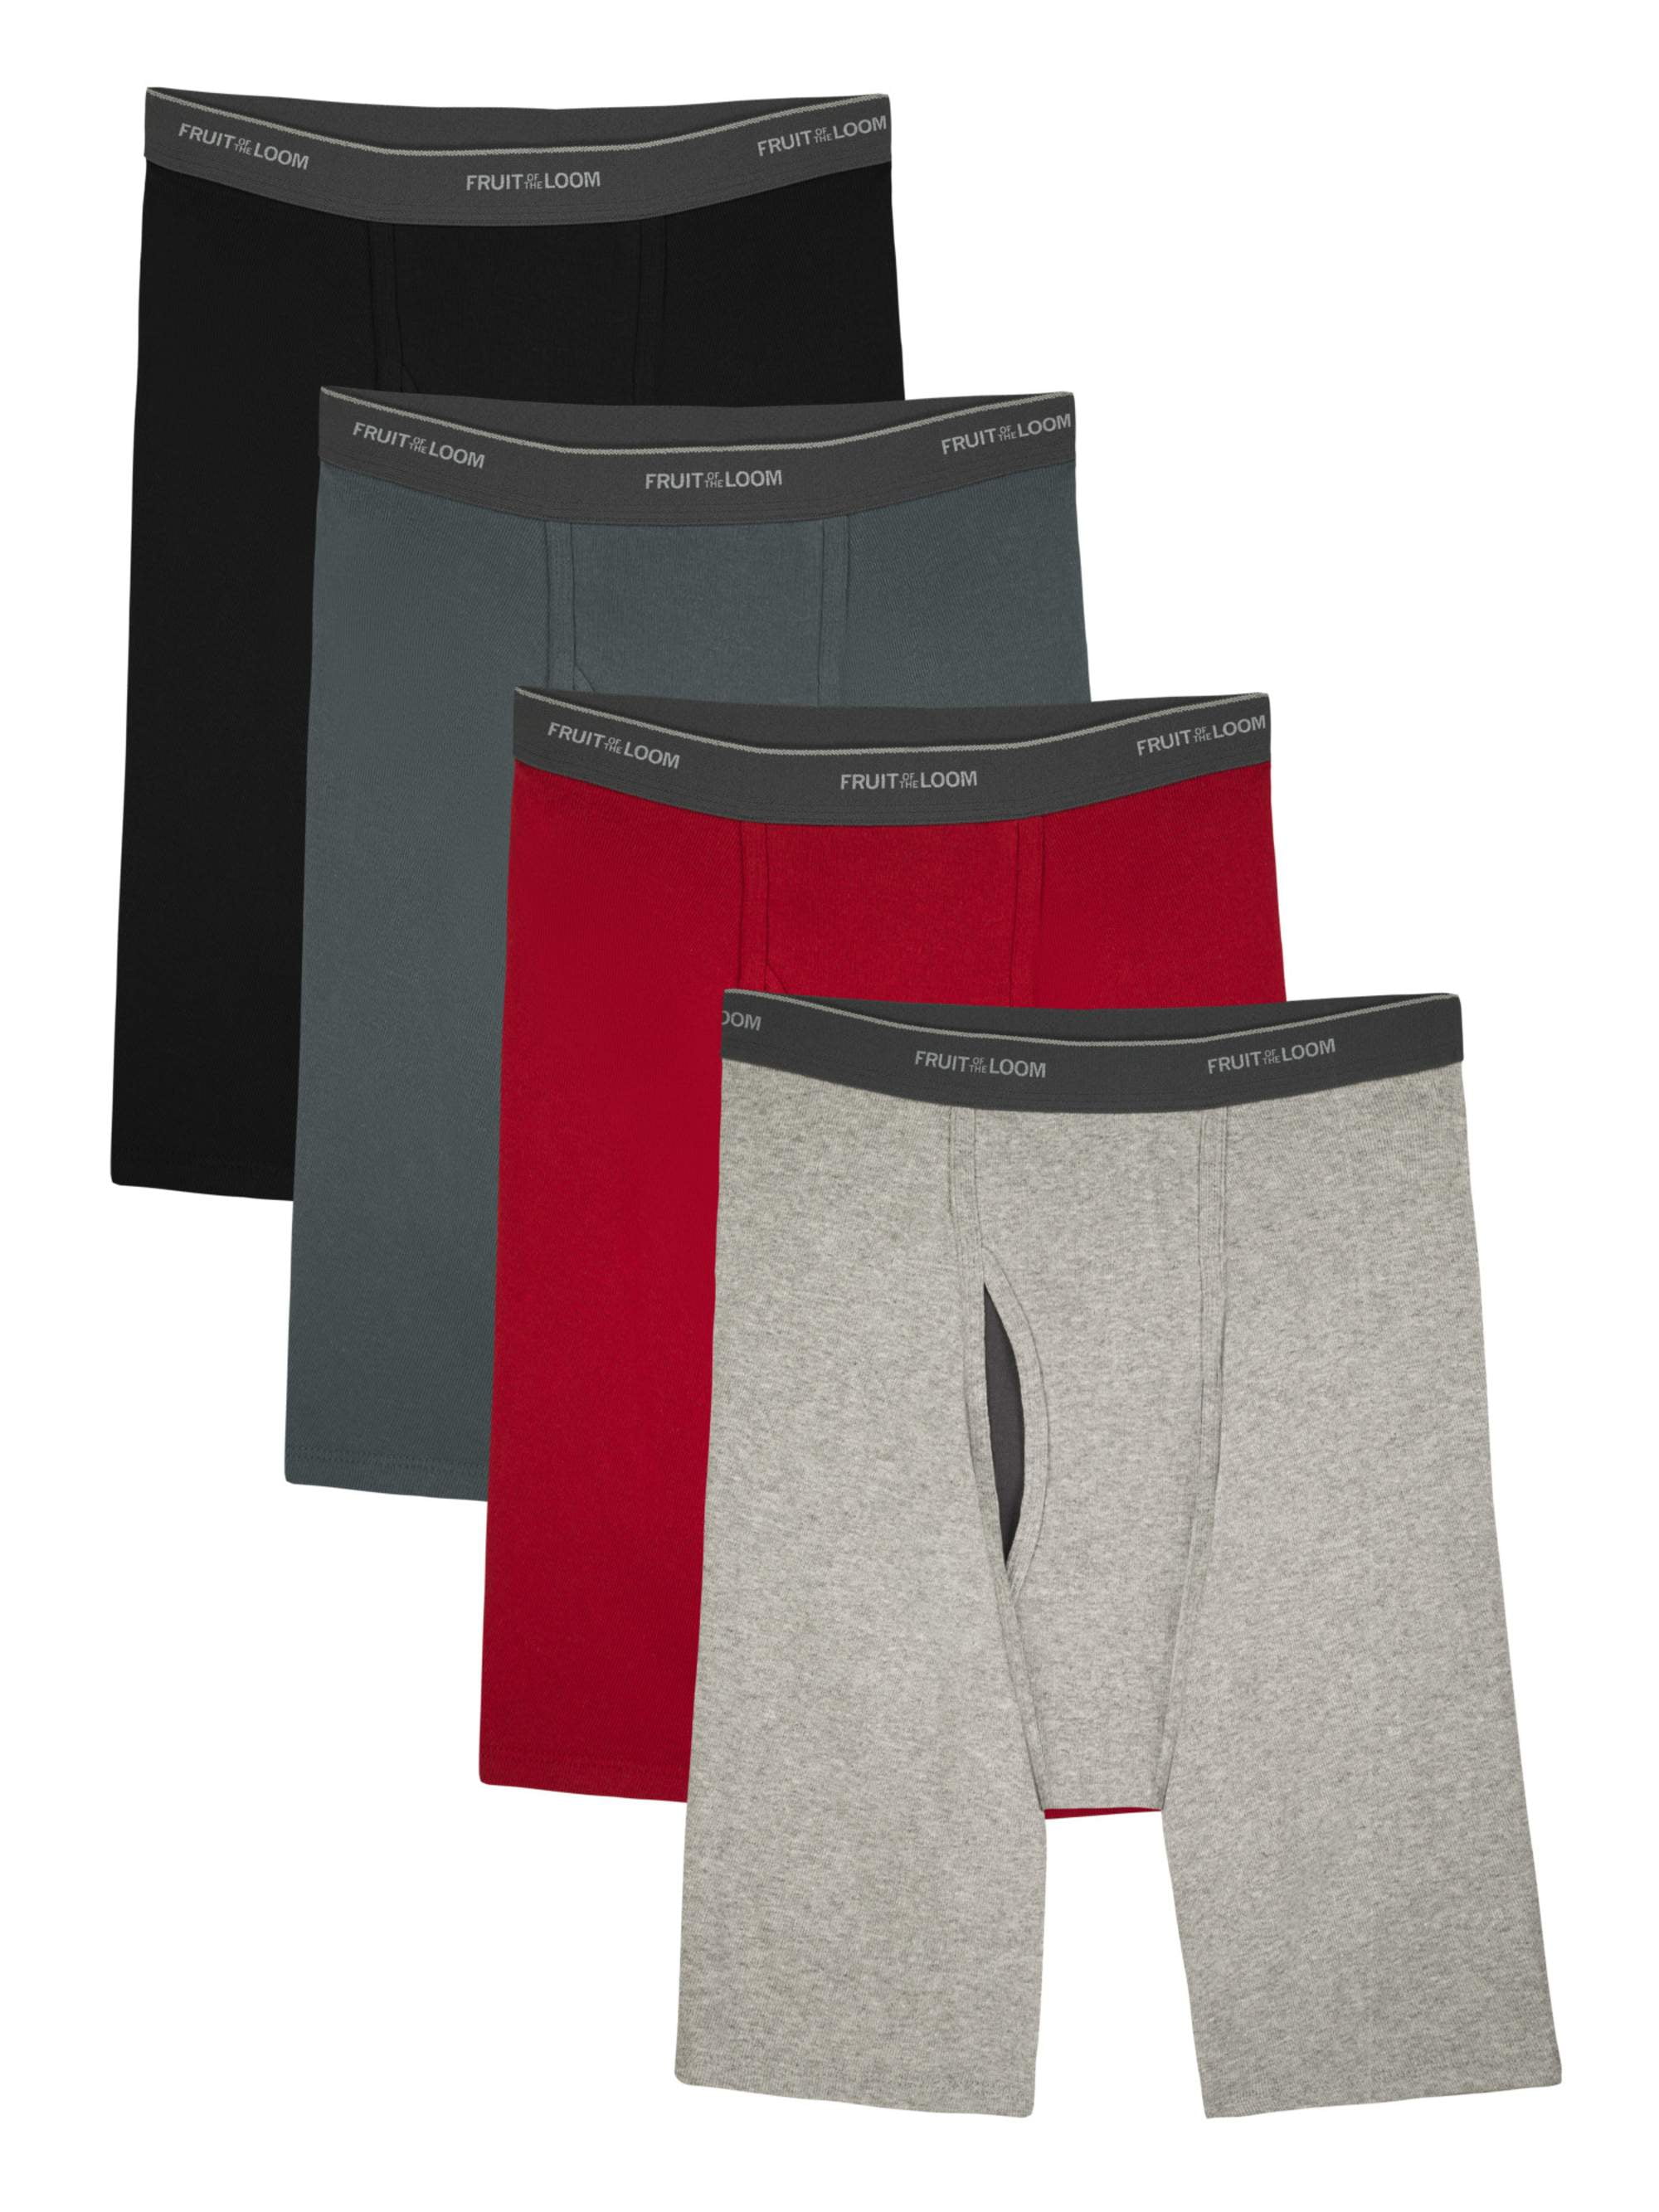 Fruit of the Loom - Fruit of the Loom Men's CoolZone Fly Assorted Long ...